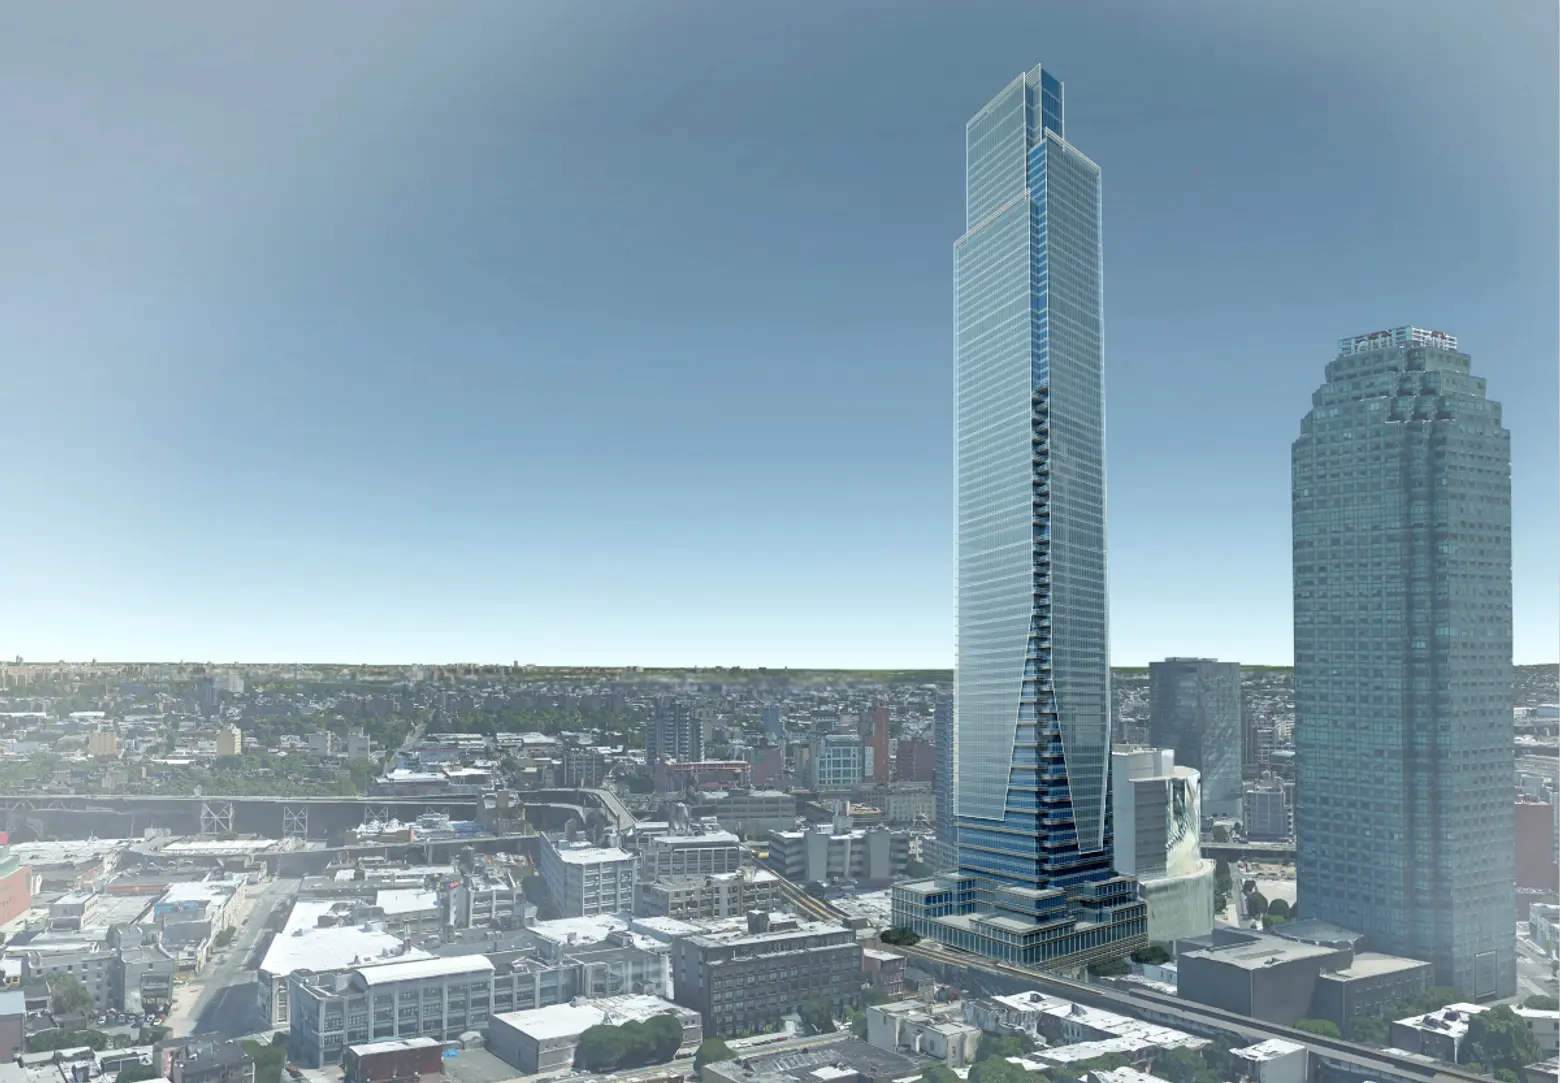 Permits Filed for 964-Foot Tower in Long Island City, Will Be Queens’ Tallest